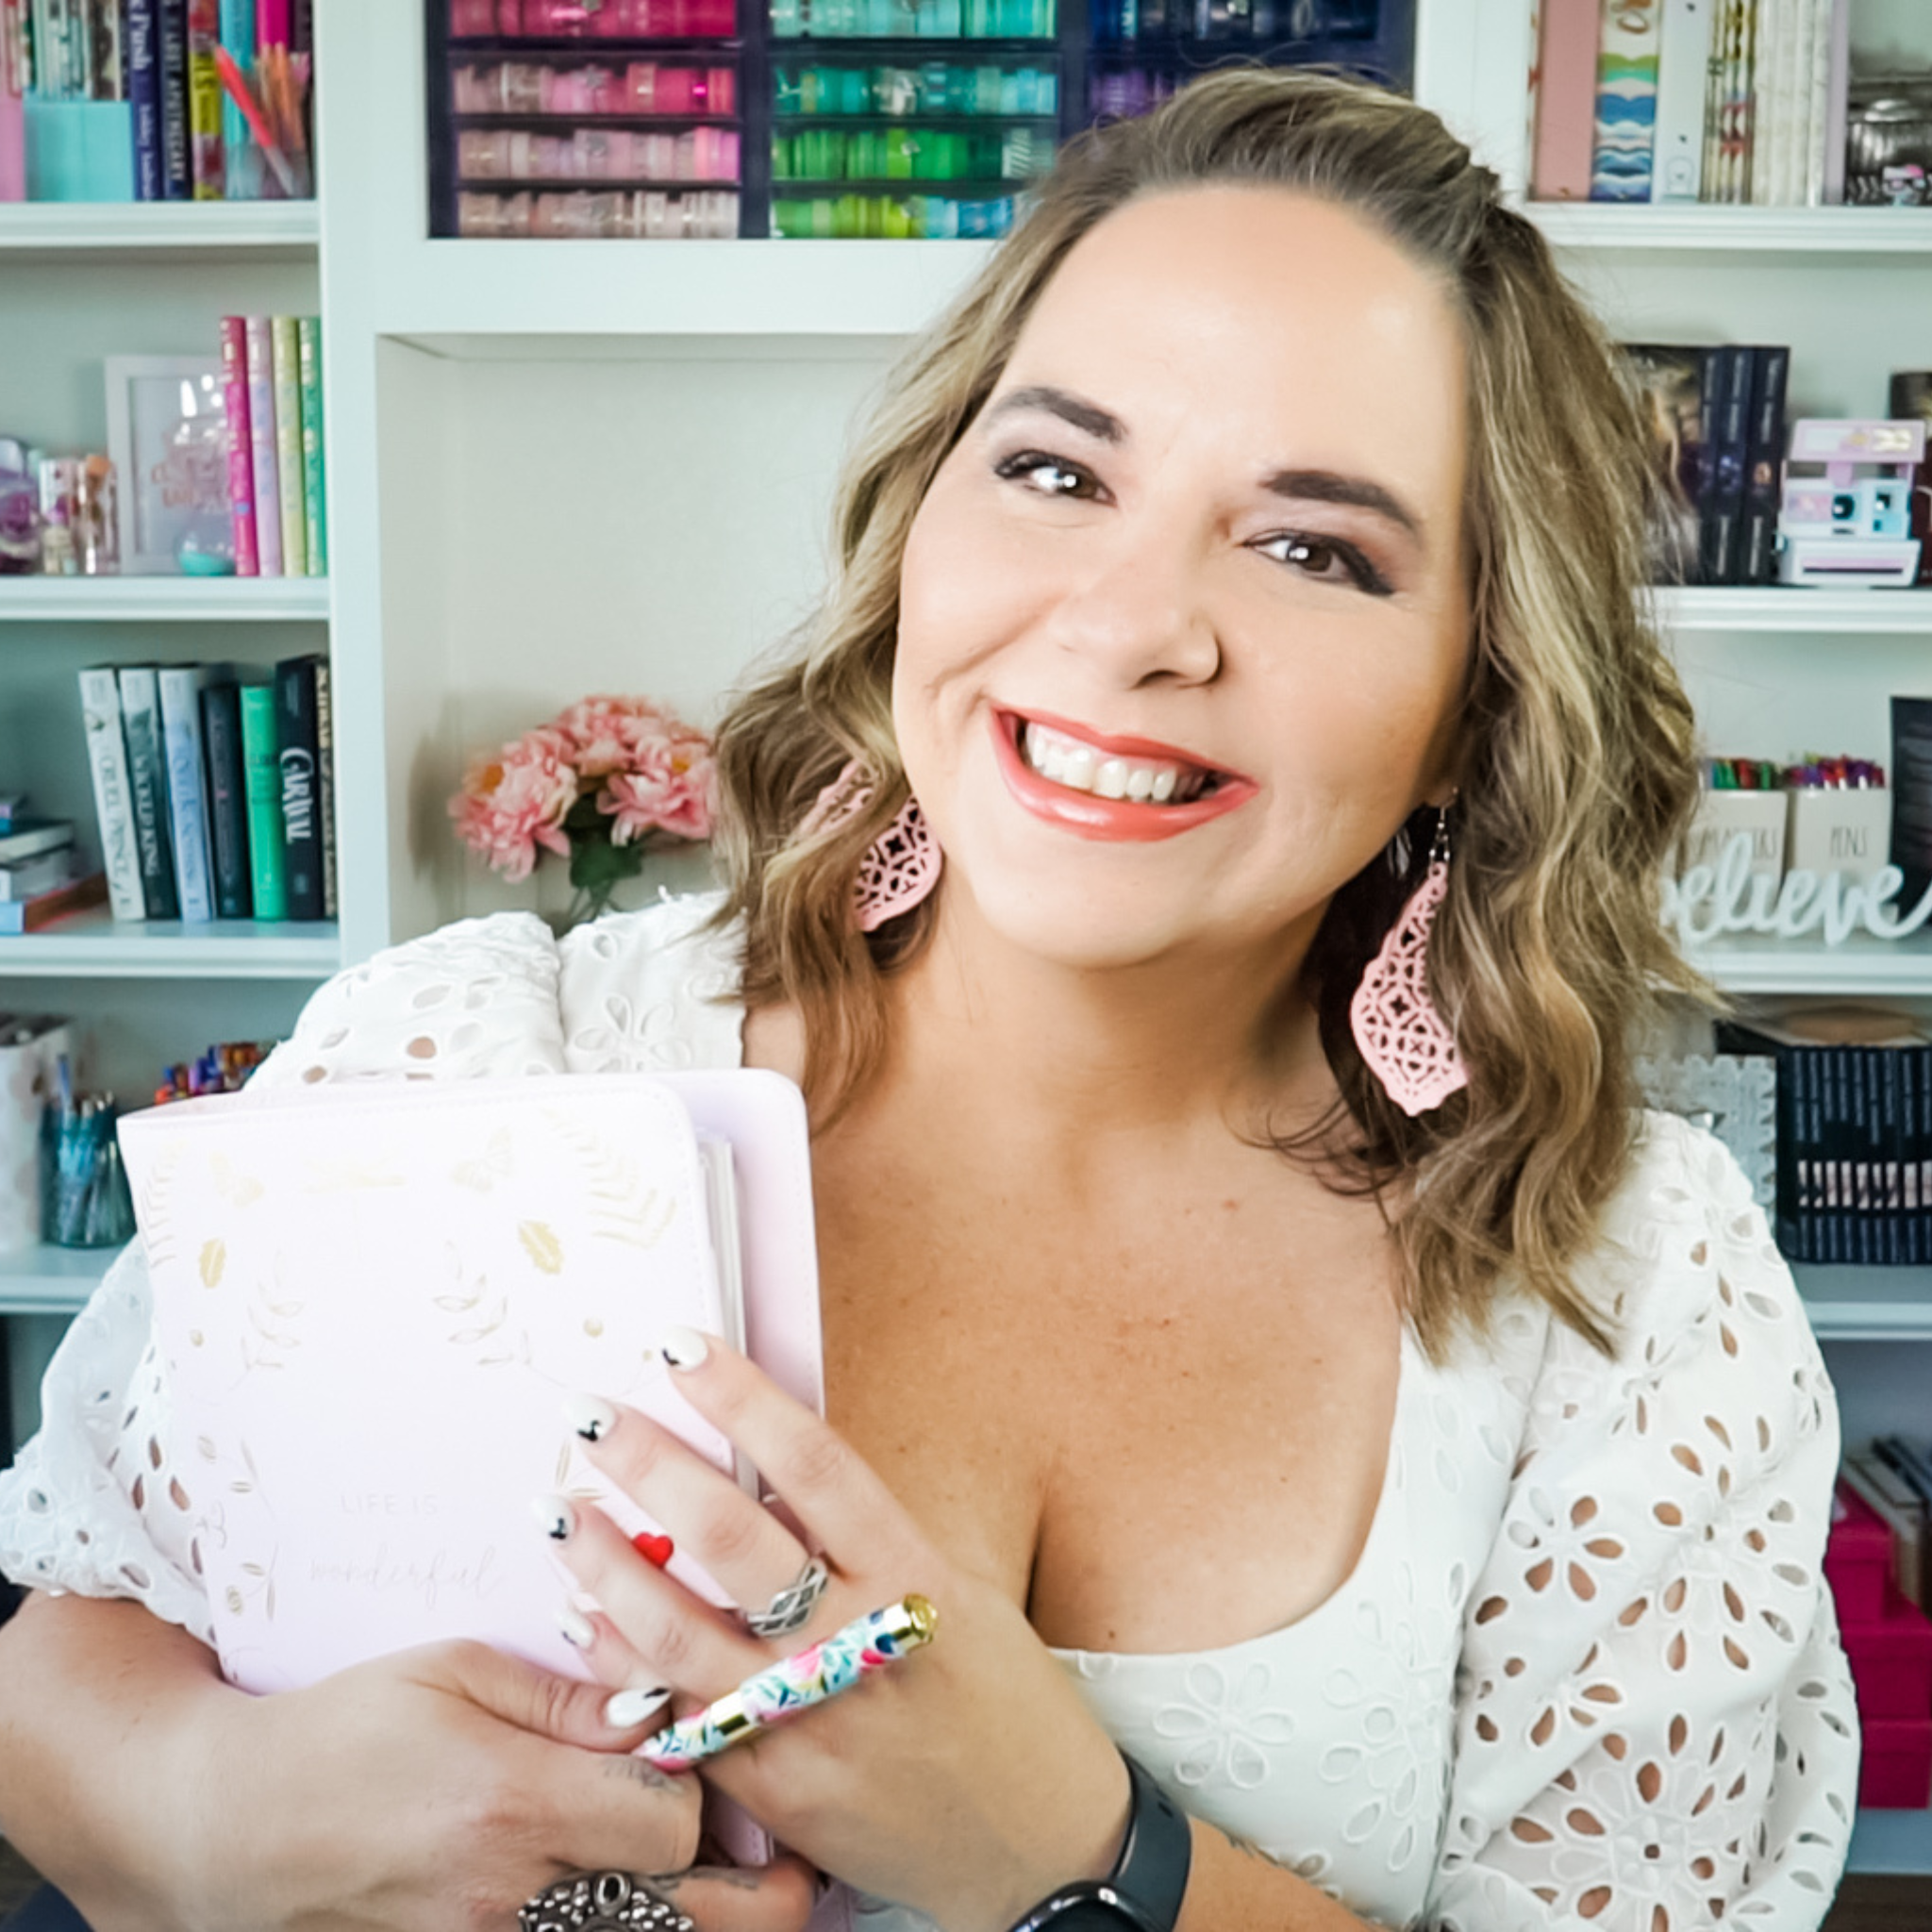 Sarra Cannon in front of a white bookshelf, smiling and holding a sheaf of papers and a pen.